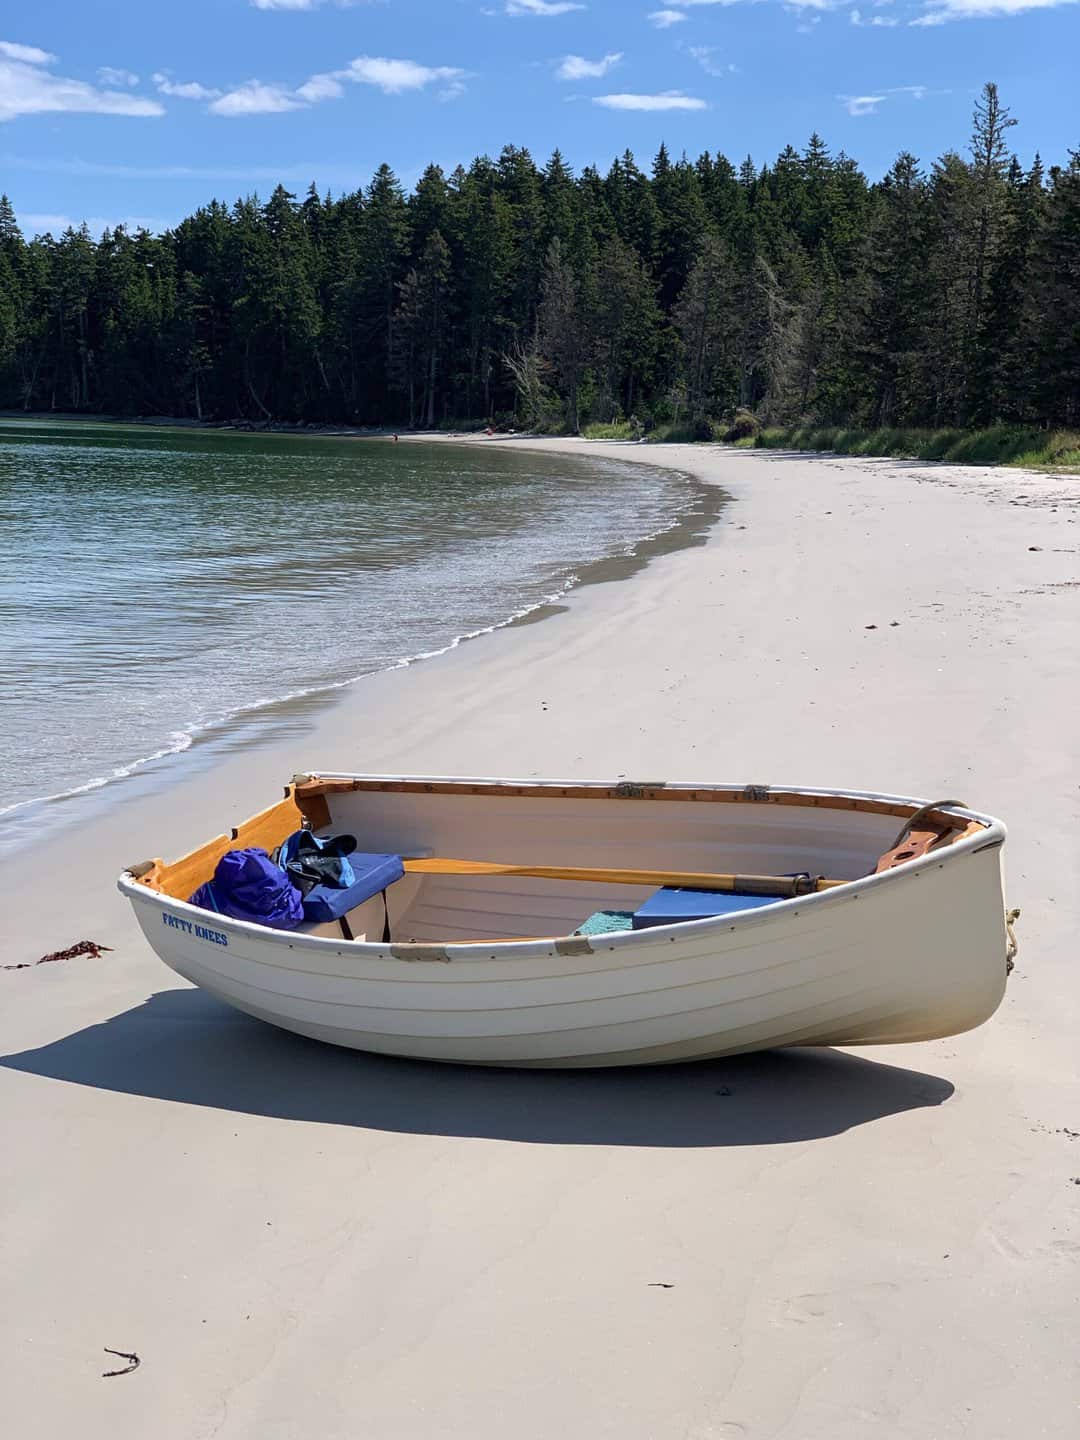 dinghy pulled up on long sandy beach